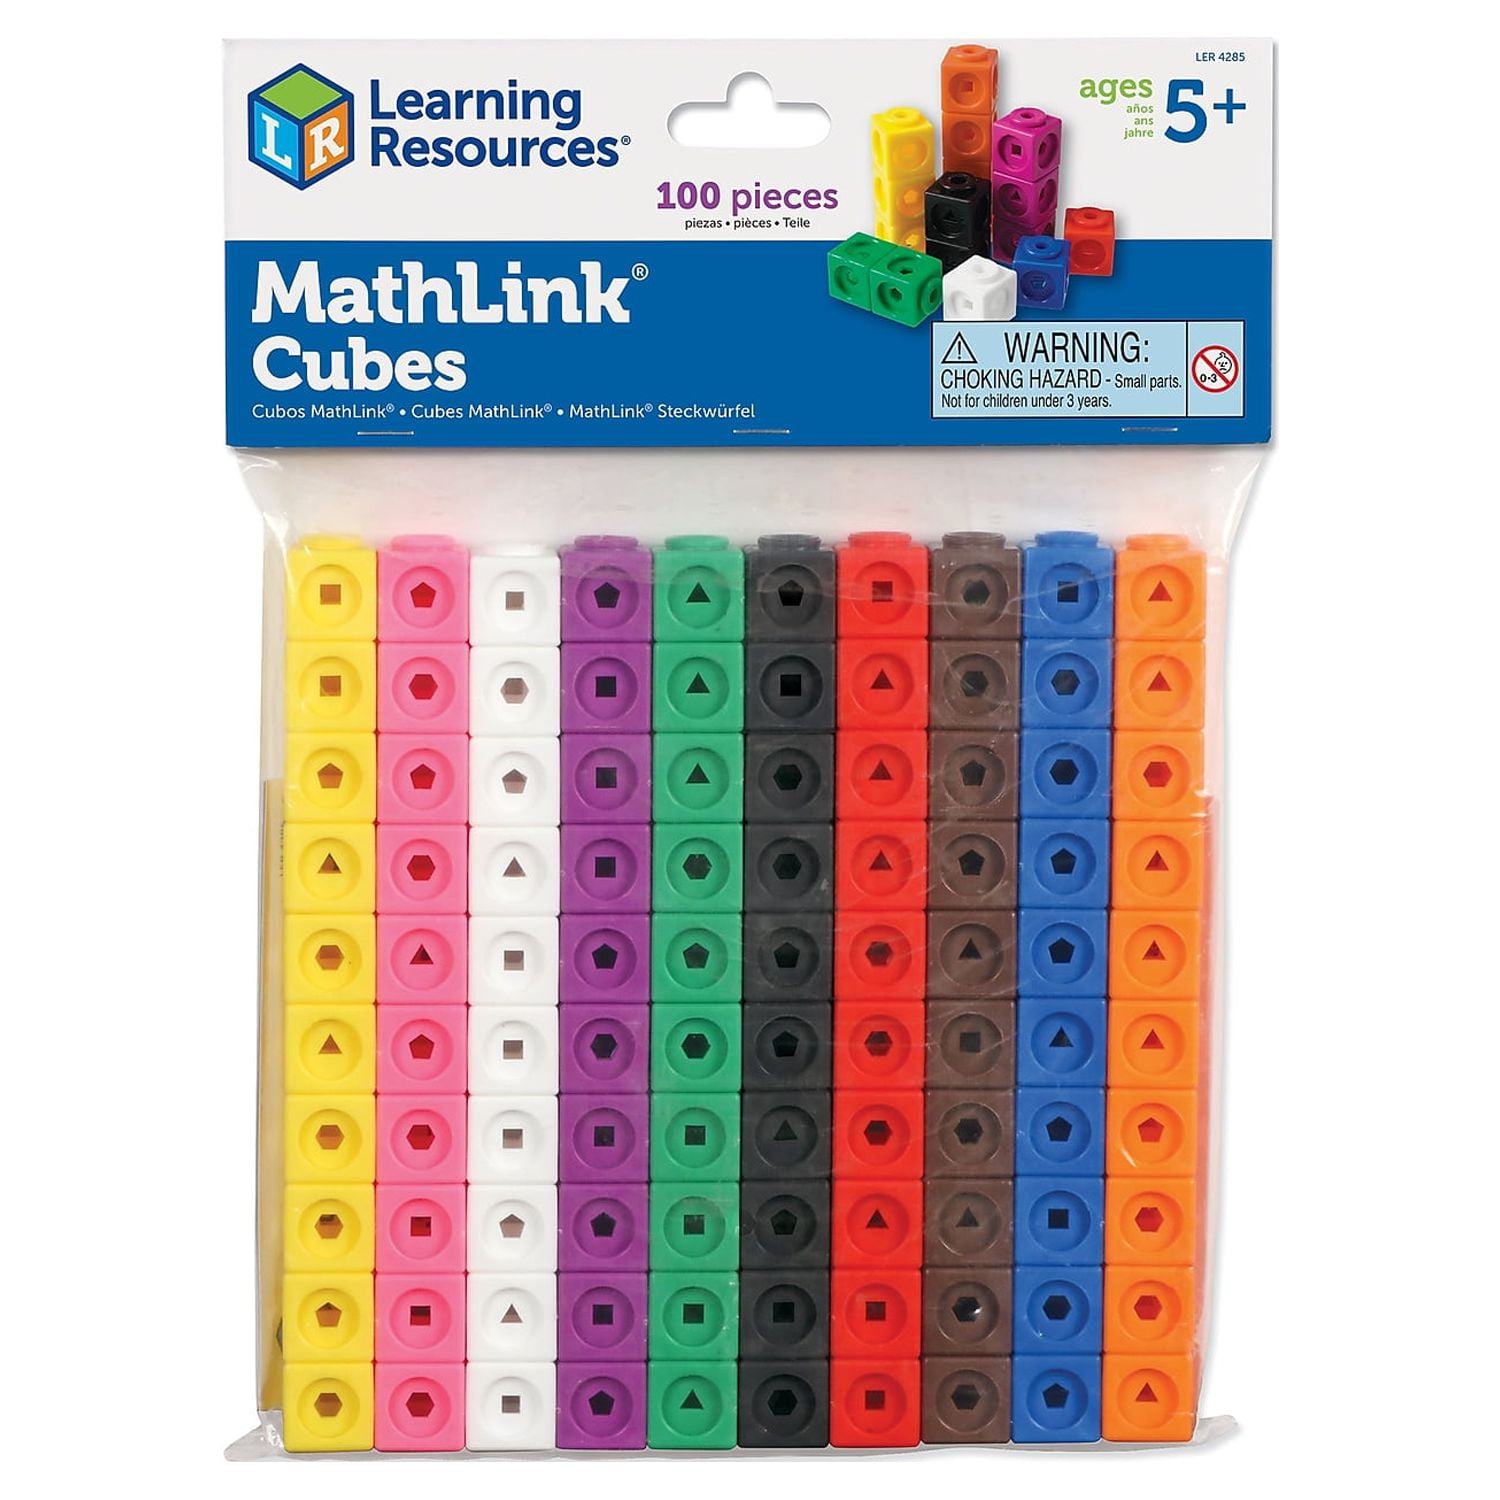 edxeducation Mini Geometric Solids - Set of 40 - 3D Shapes for Math &  Geometry - Multicolored Math Manipulatives For Kids - 10 Different Shapes